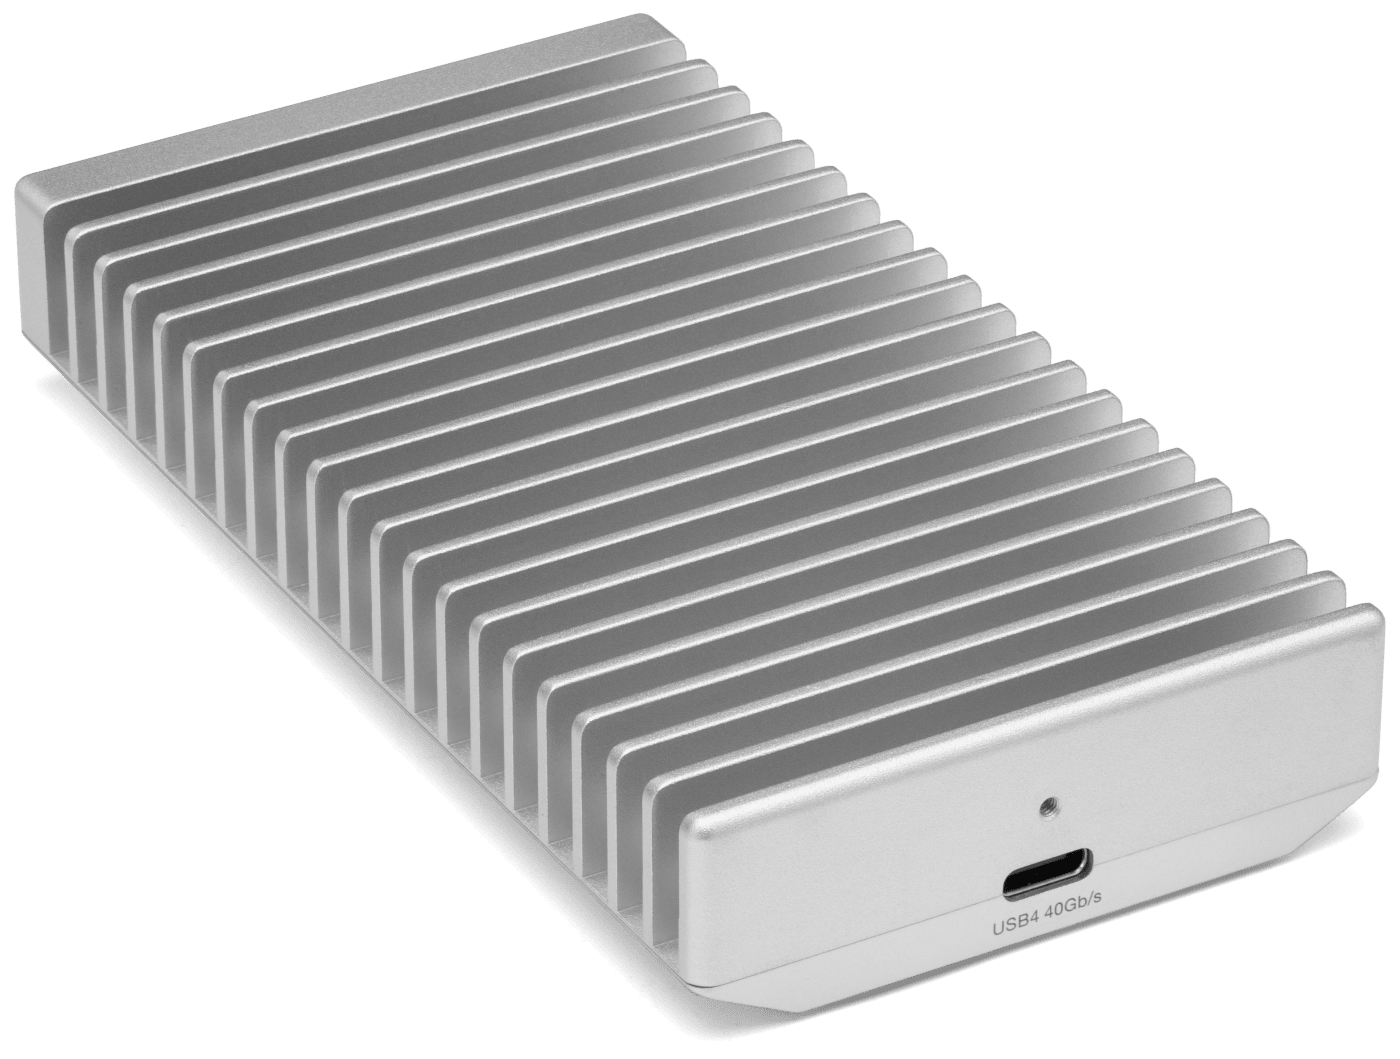 Build the fastest portable SSD